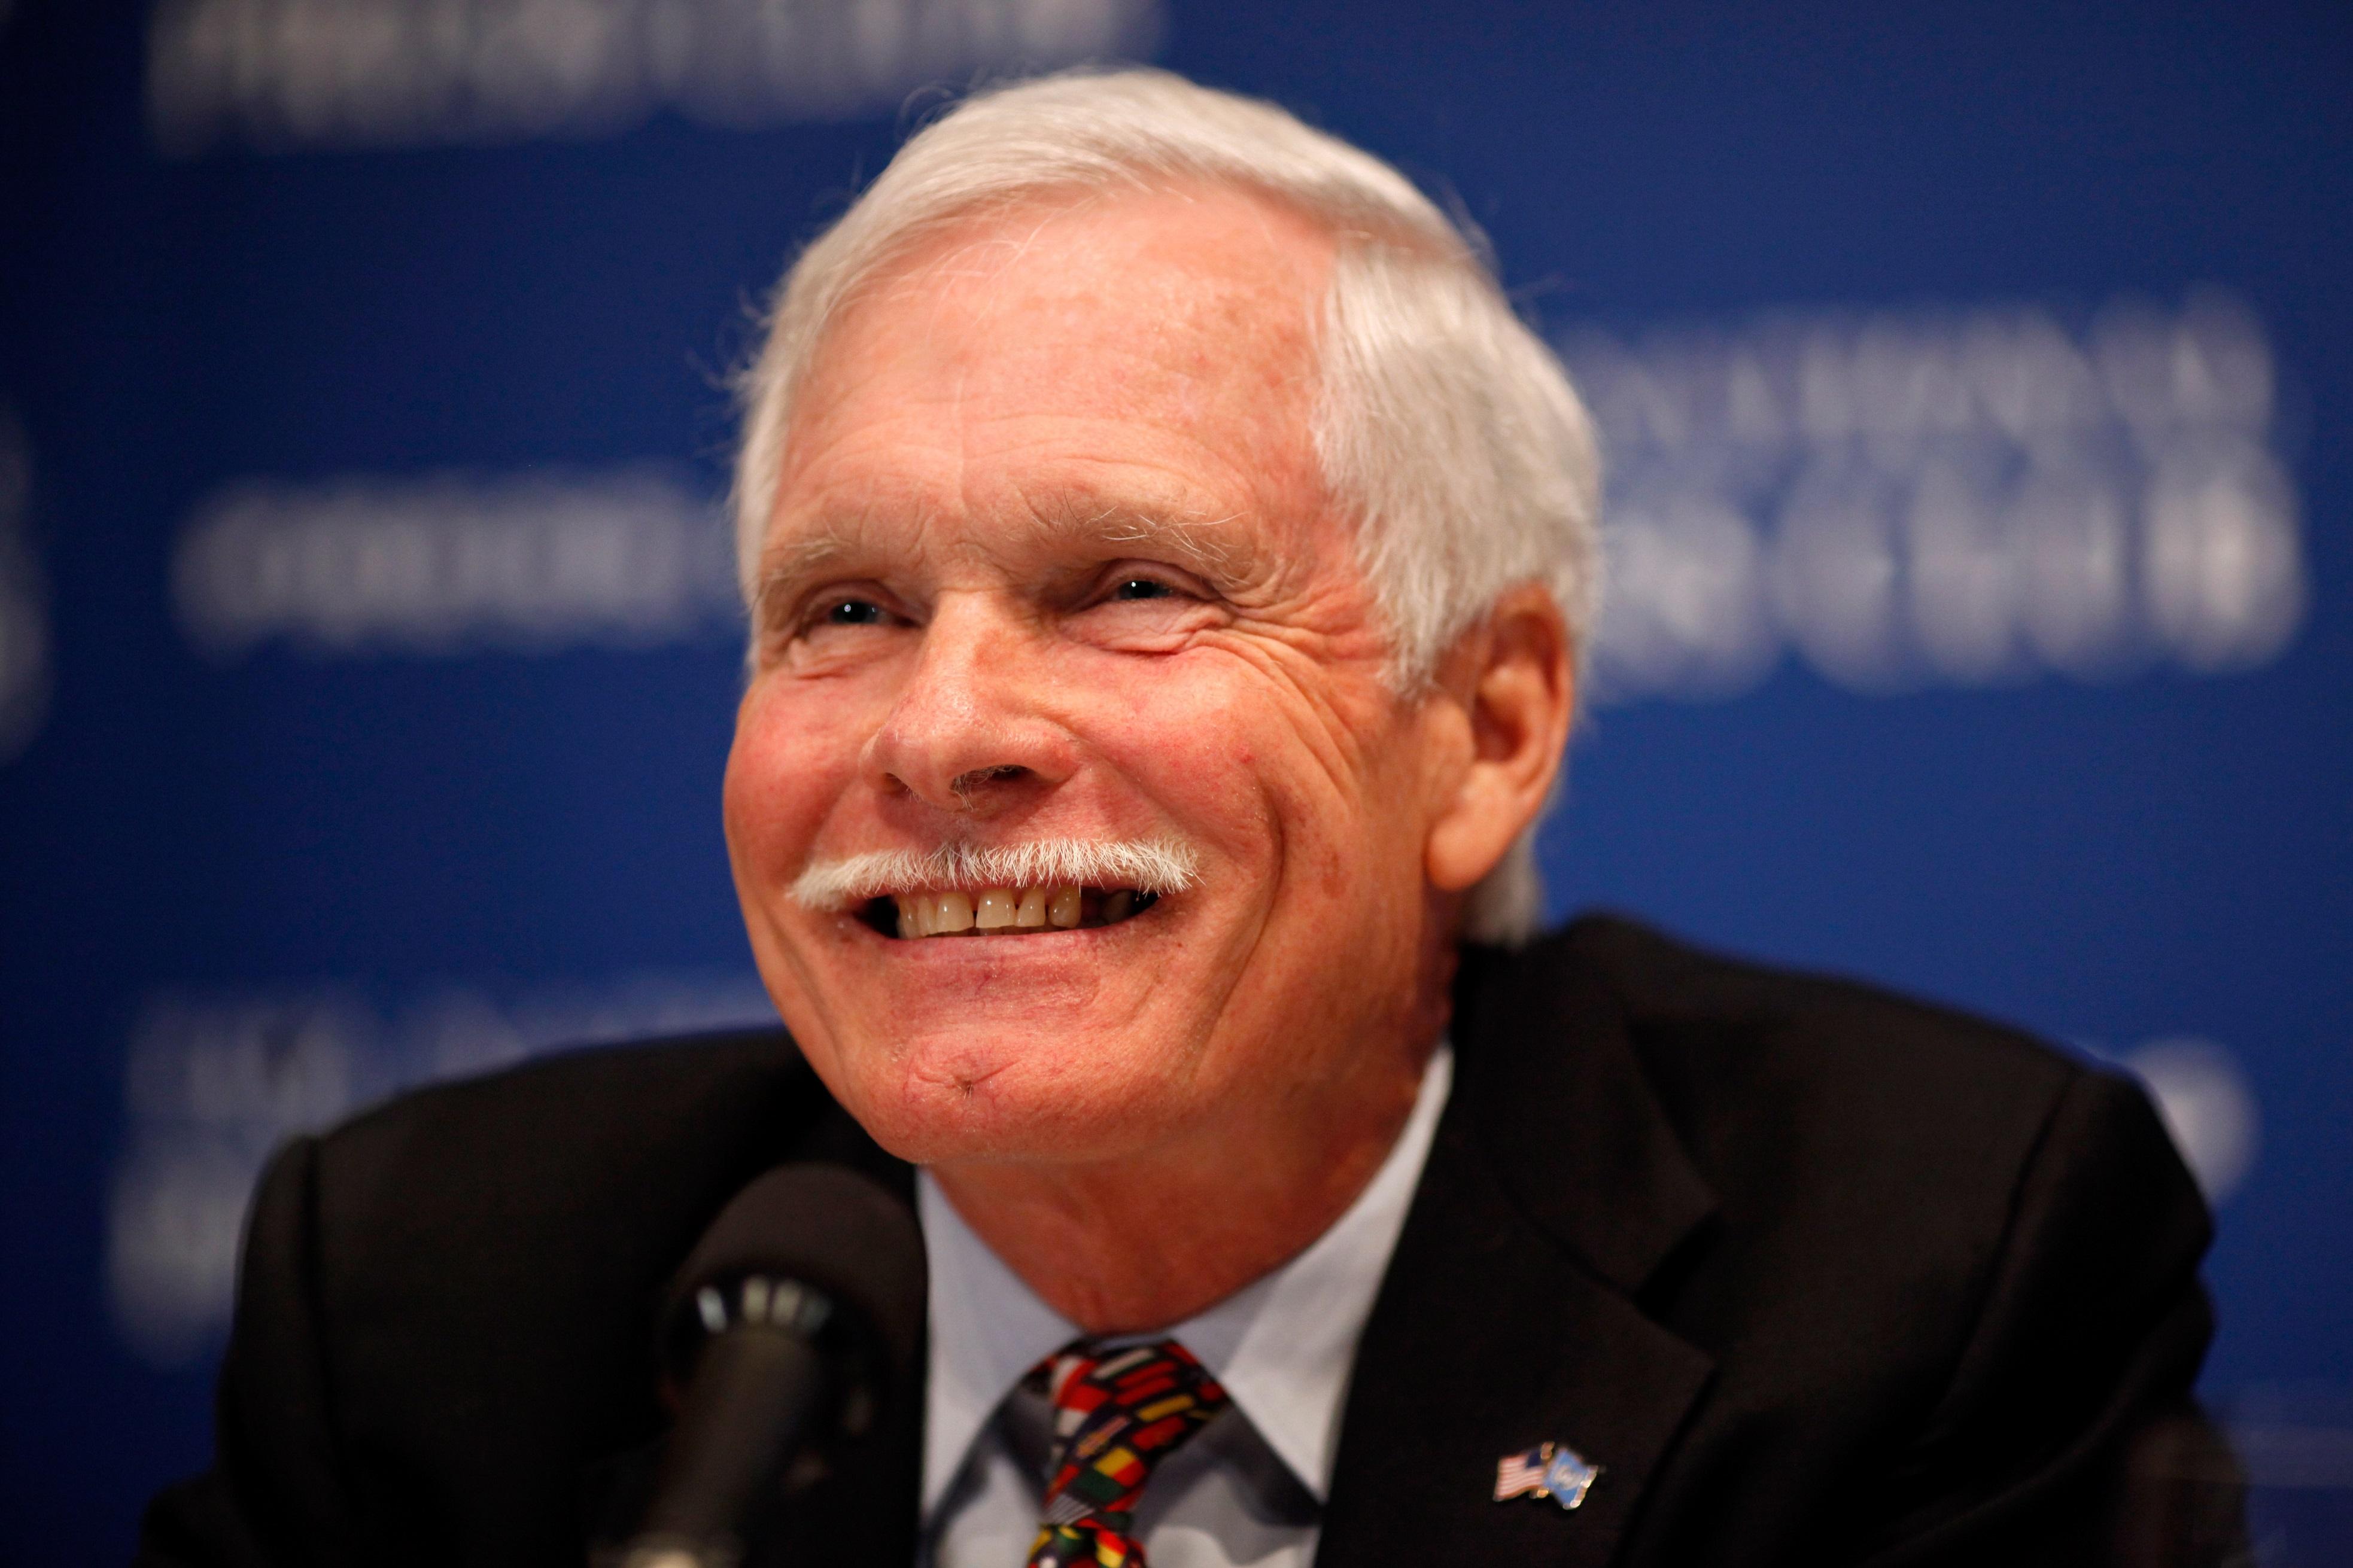 Ted Turner’s Net Worth: How the Famous CNN Founder Made His Money